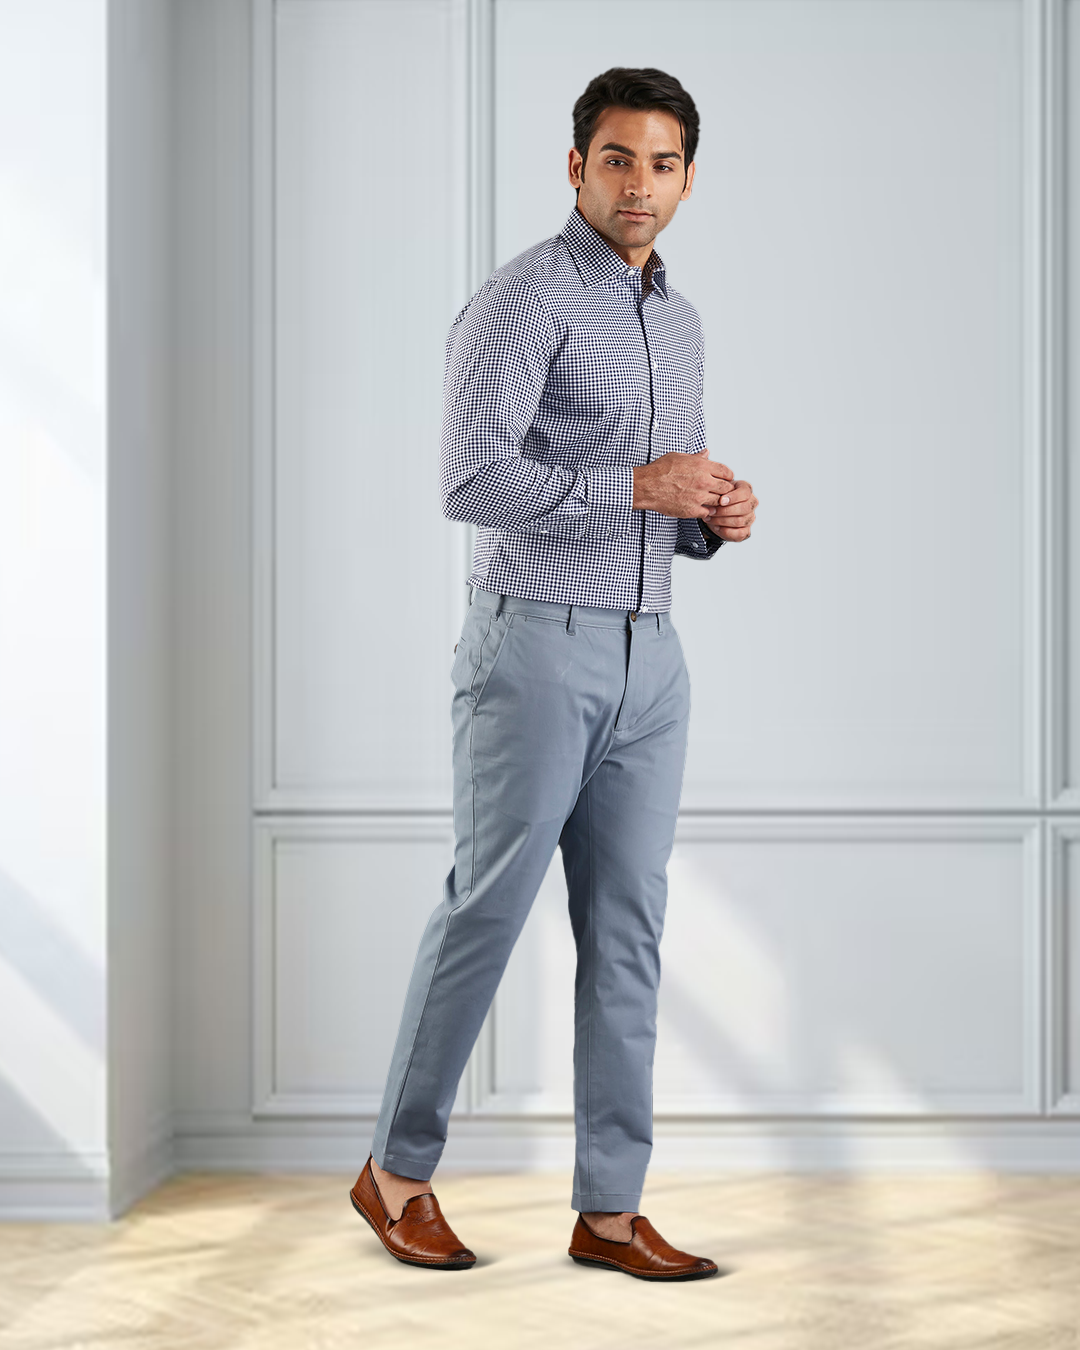 Model  wearing custom Genoa Chino pants for men by Luxire in soft blue grey hands together